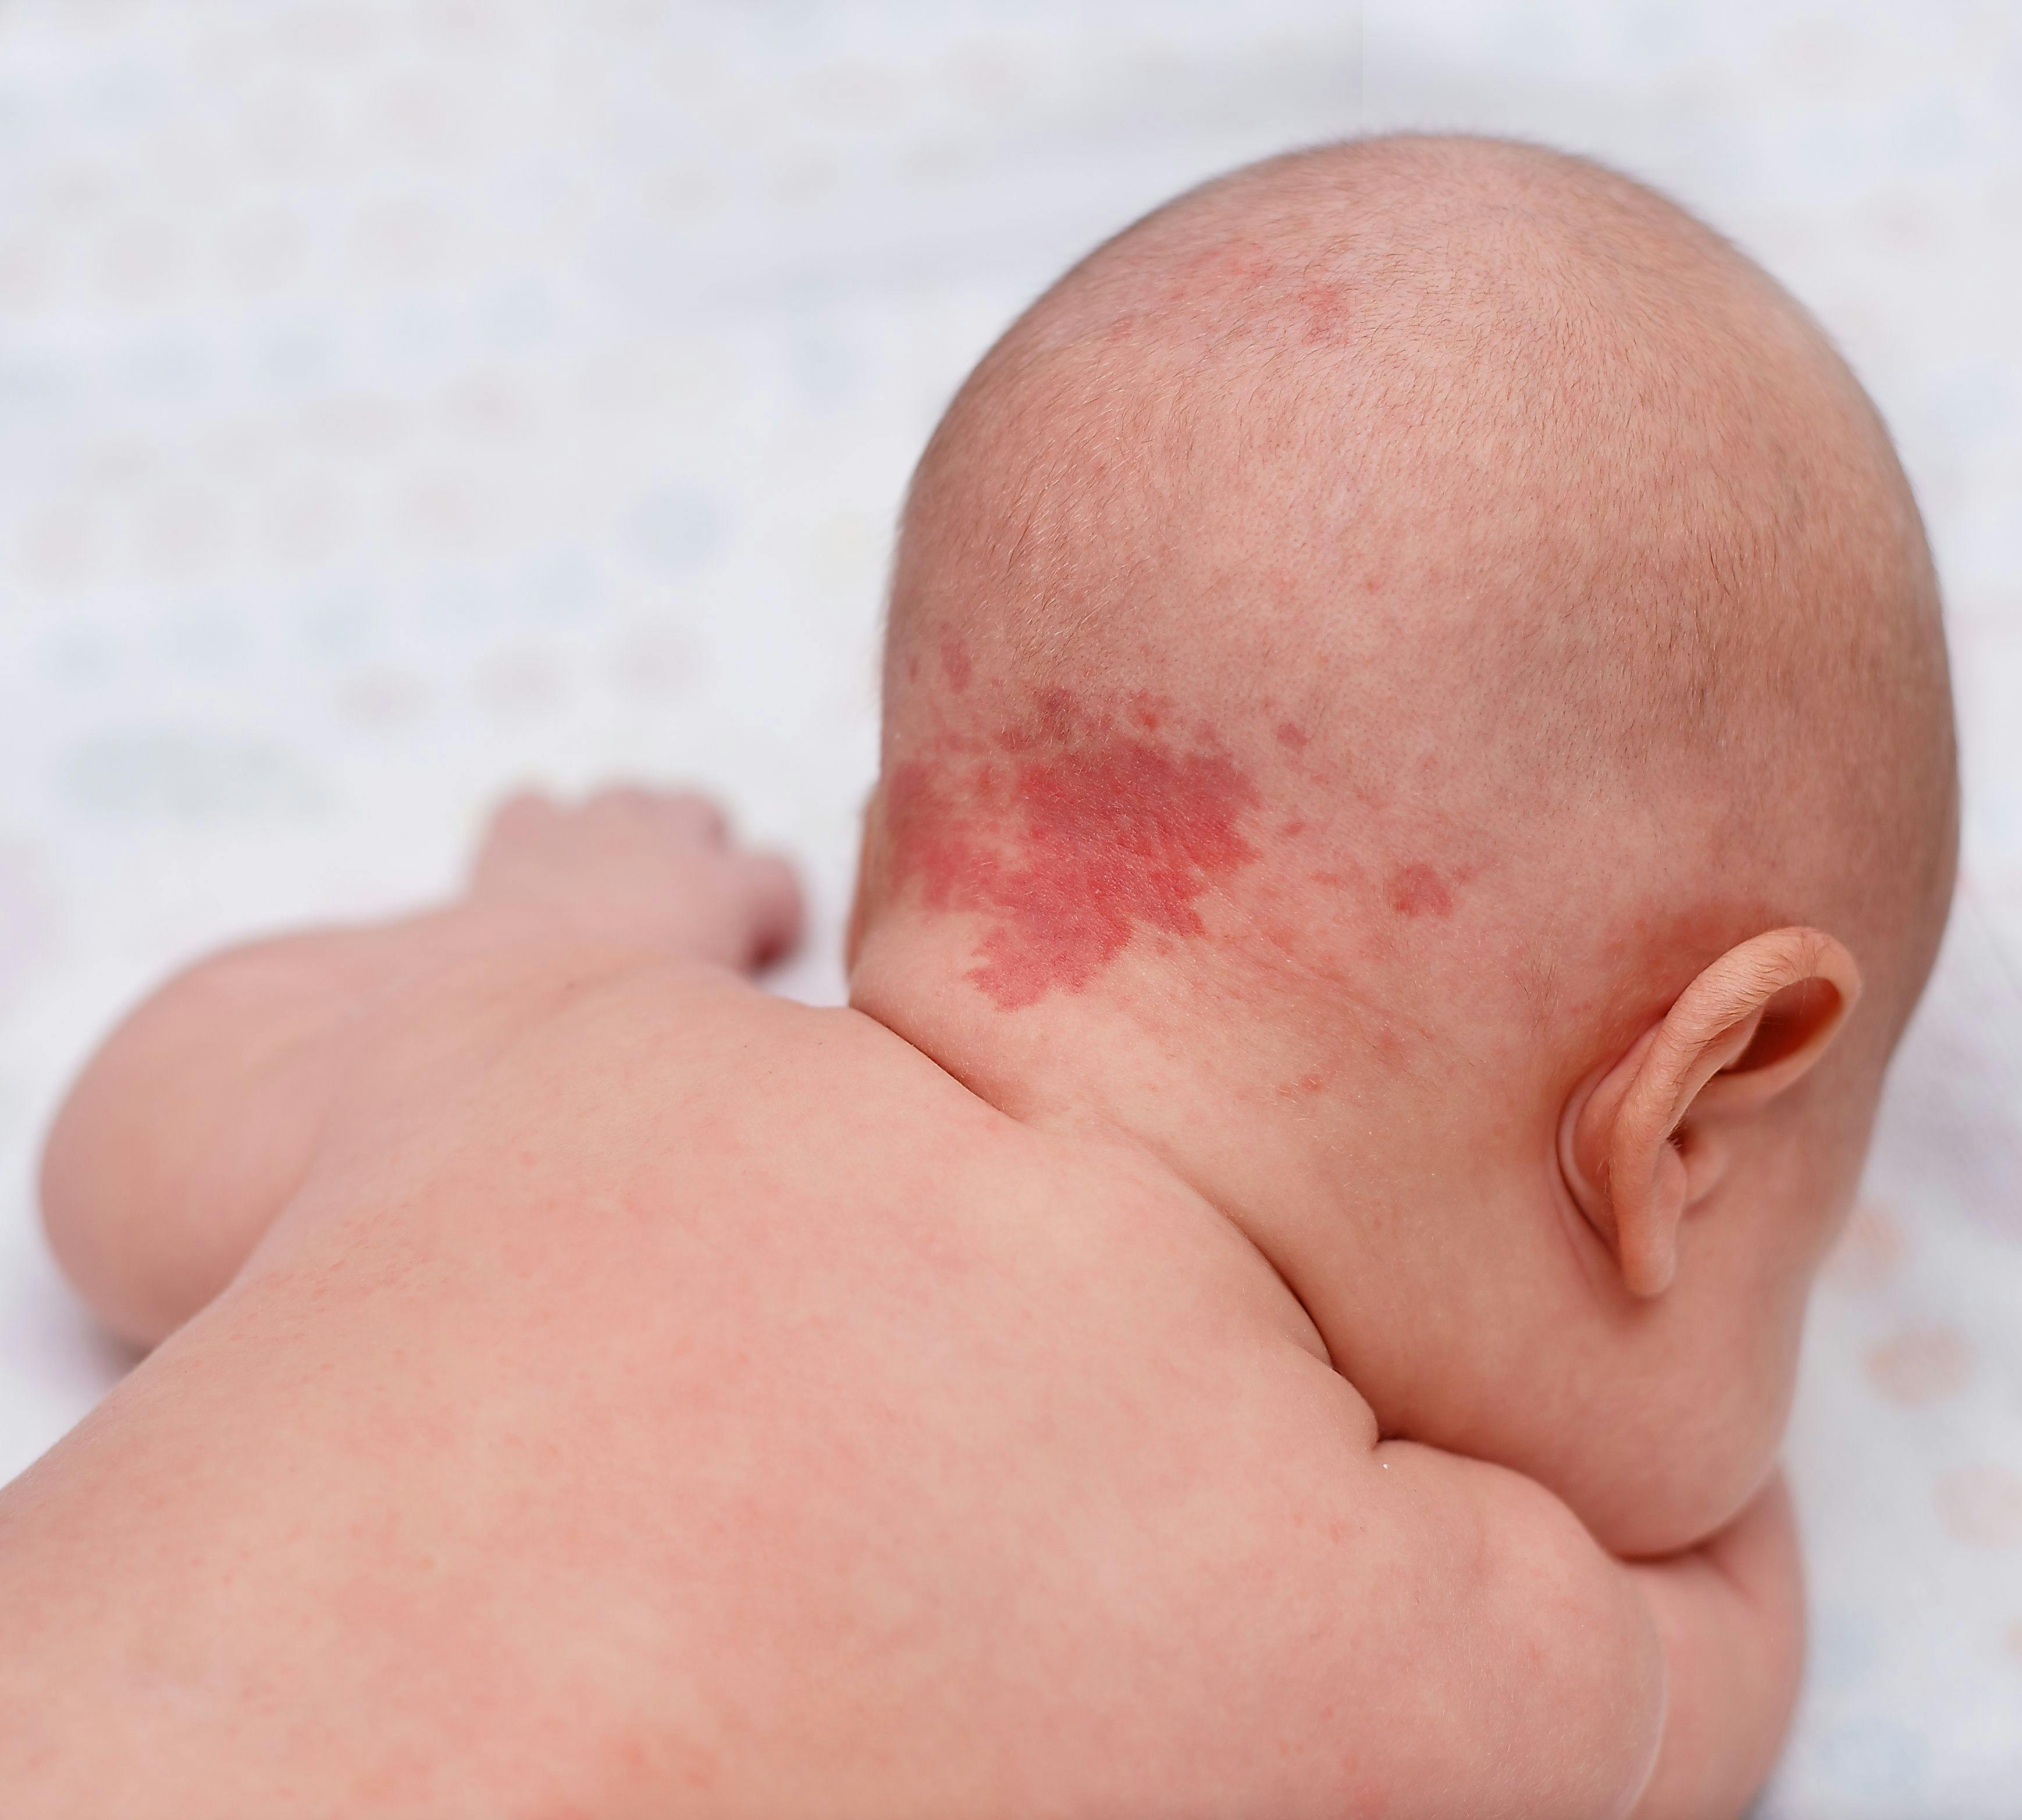 Monique Kumar, MD, Shares the Lessons She Learned When Her Child was Born with a Port Wine Birthmark